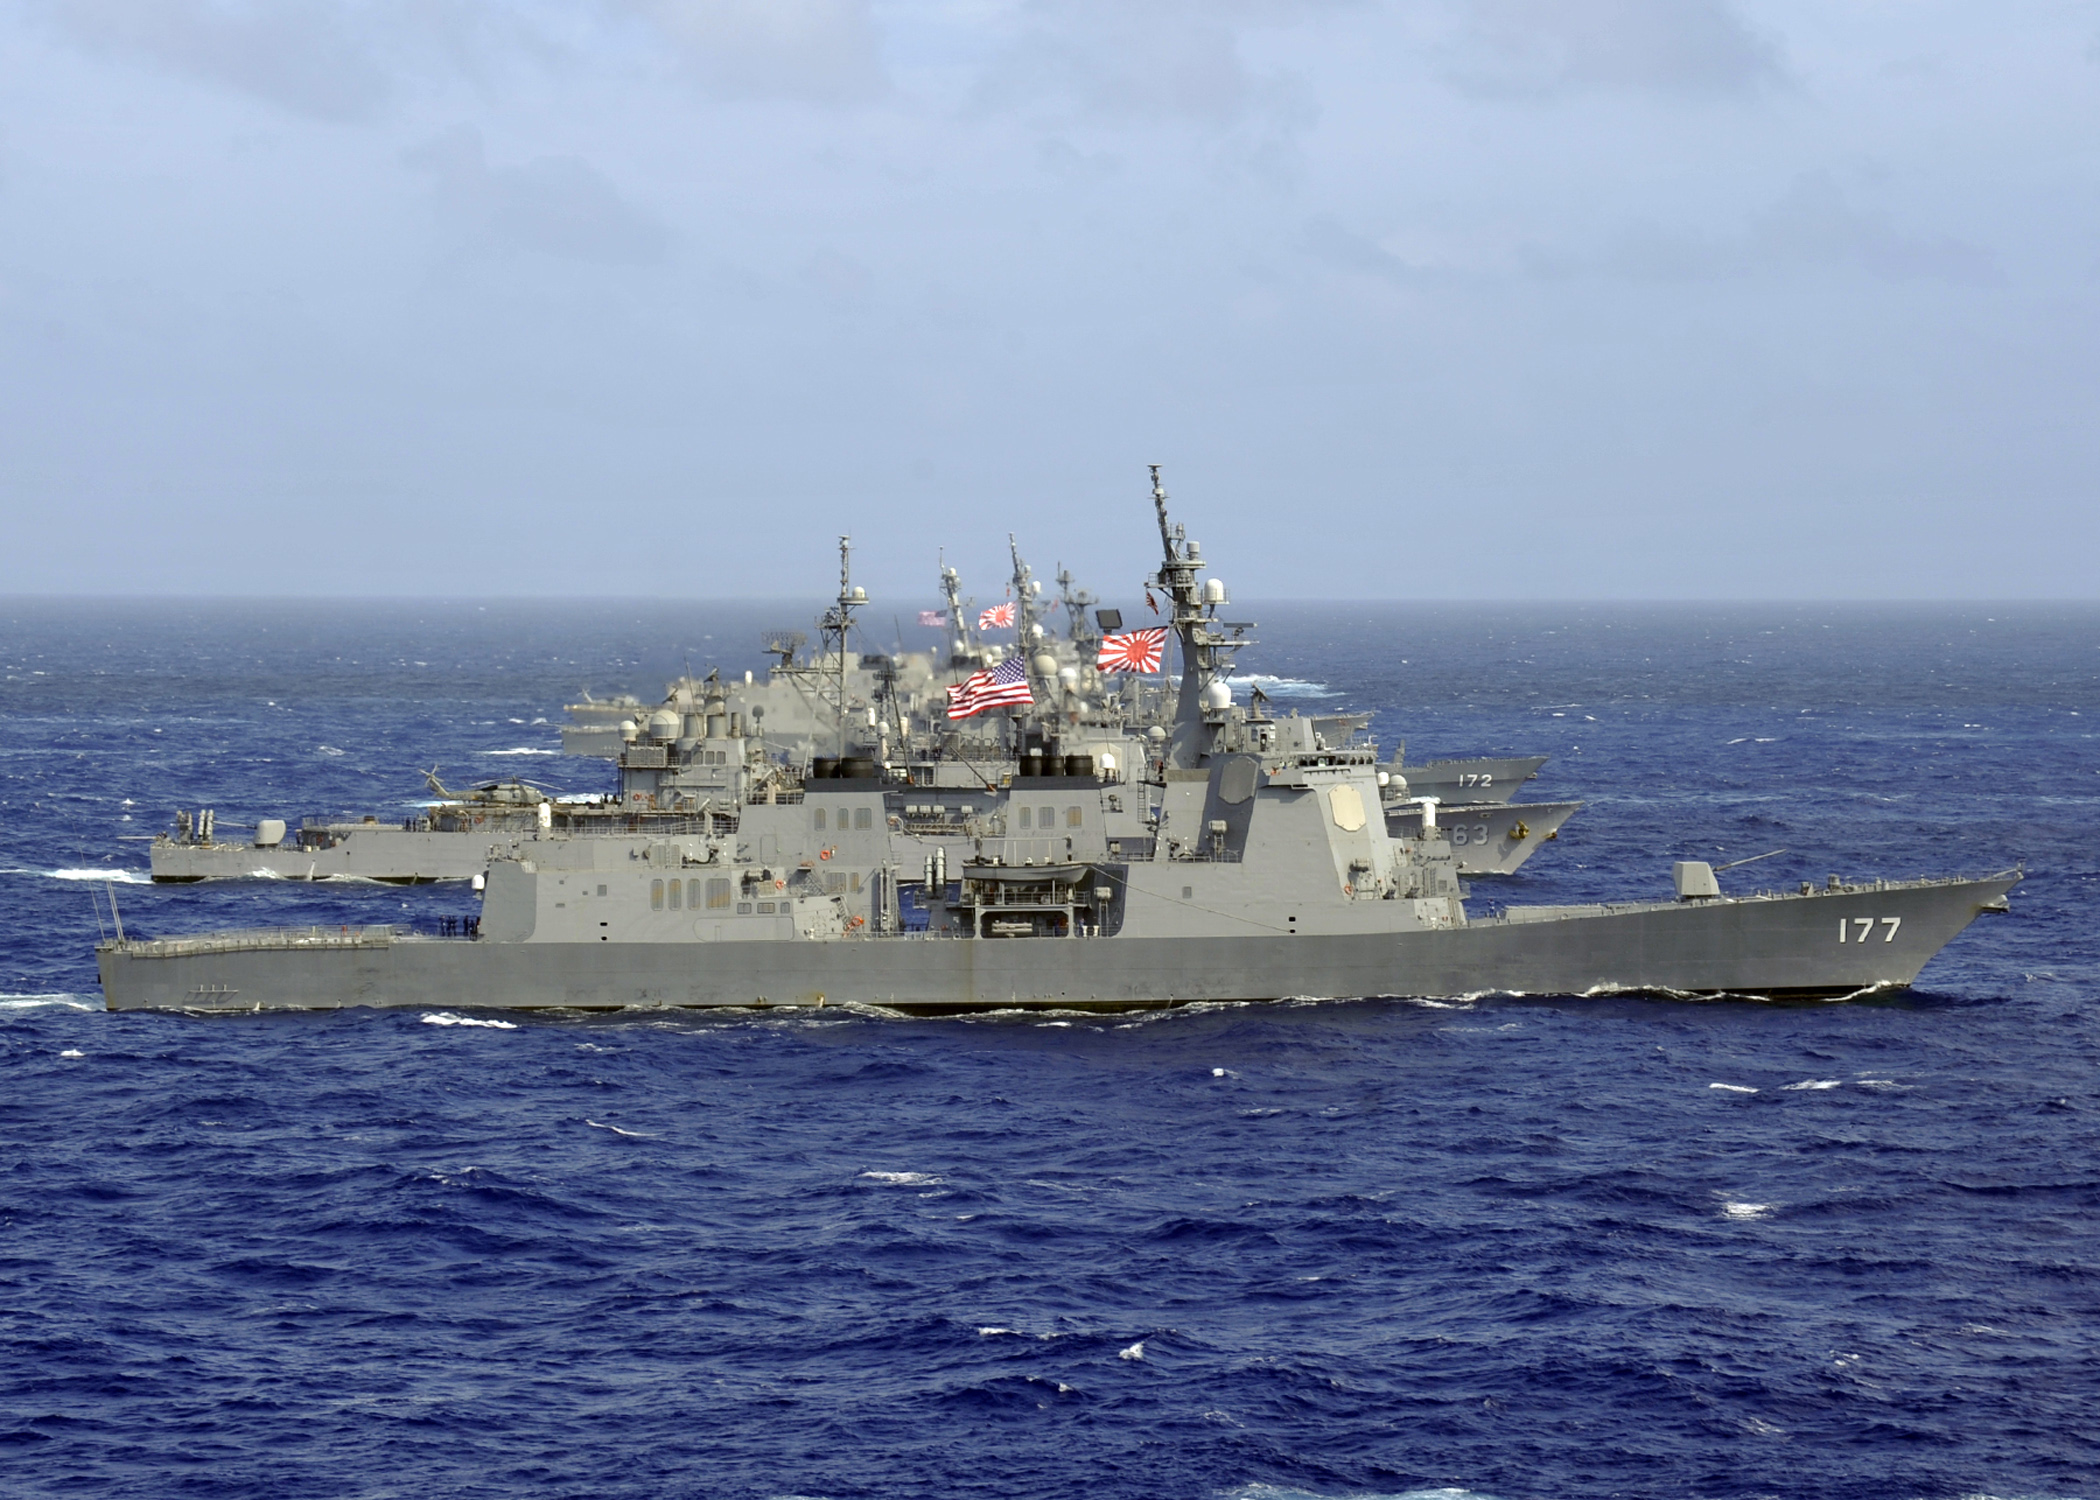 US_Navy_111104-N-DS193-049_The_Japan_Maritime_Self-Defense_Force_guided-missile_destroyer_JDS_Atago_%28DDG_177%29_transits_in_formation_with_U.S._Navy.jpg